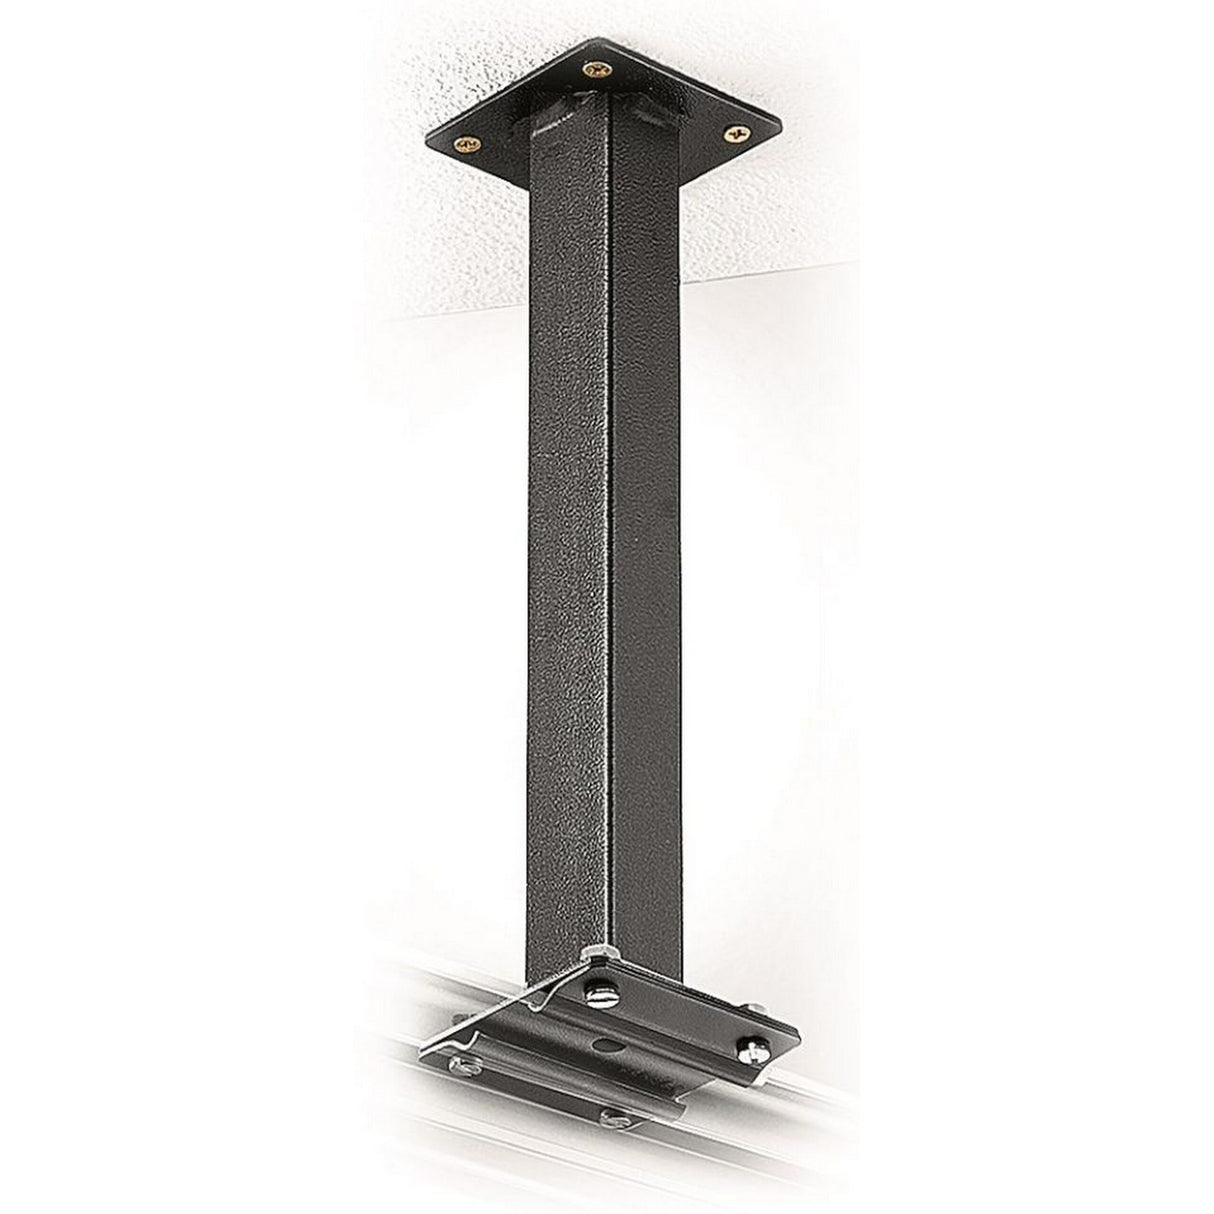 Manfrotto FF3216 Bracket for Fixing Rail to Ceiling